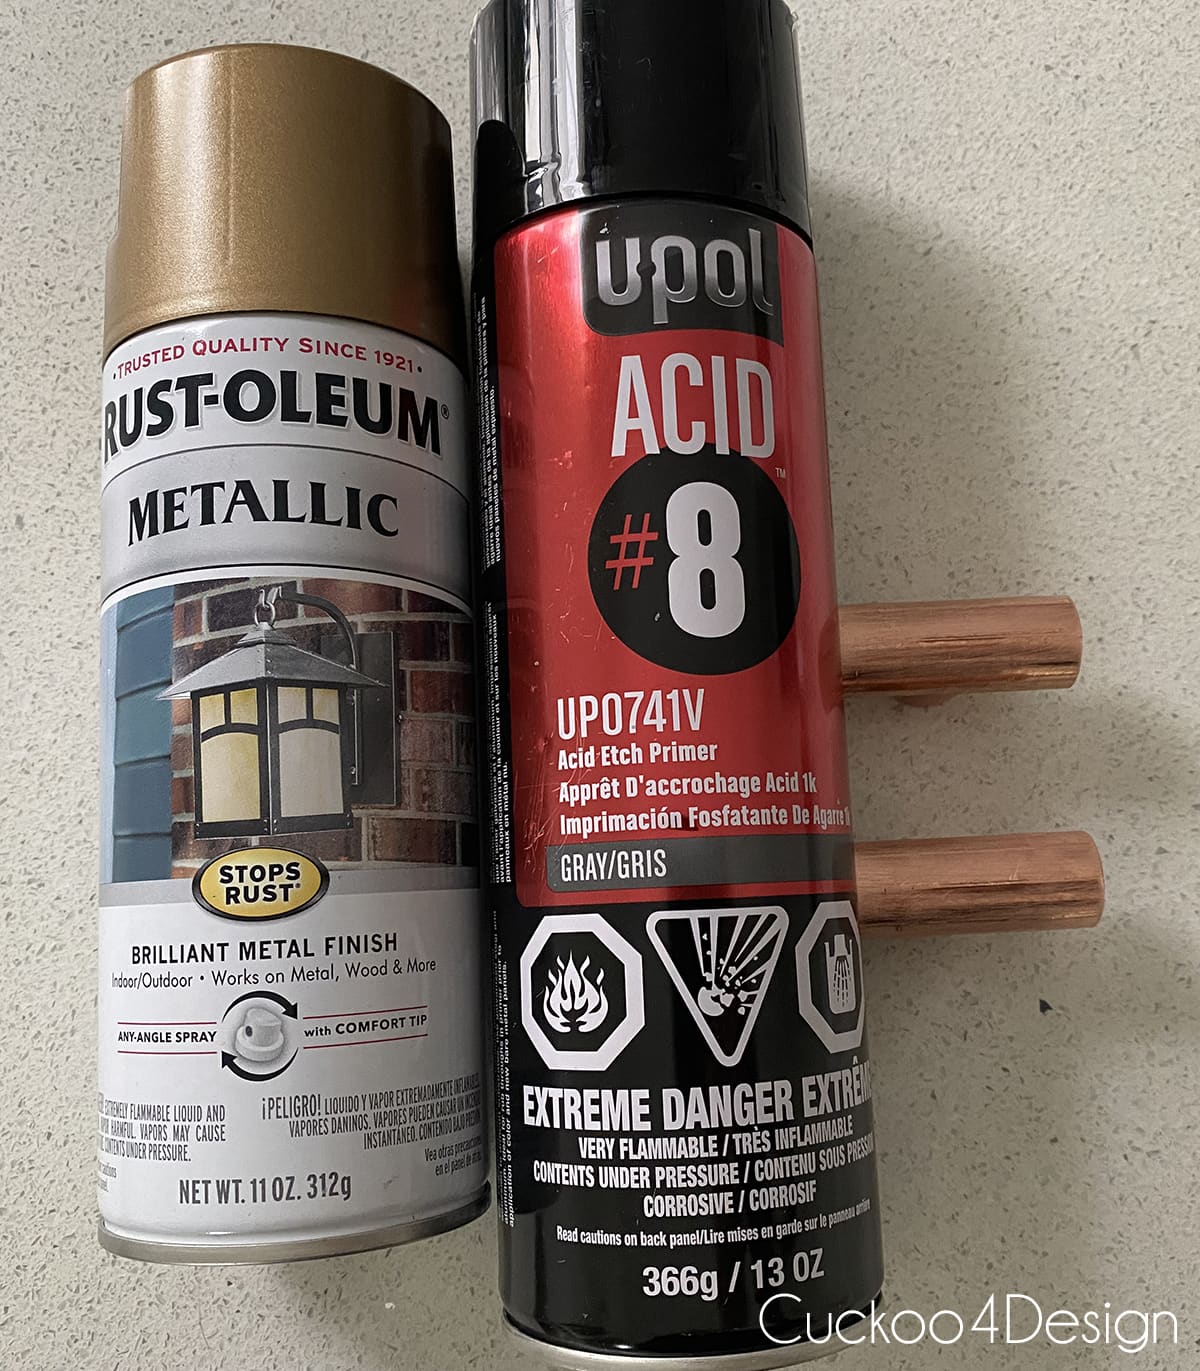 spray paints used for plumbing tees